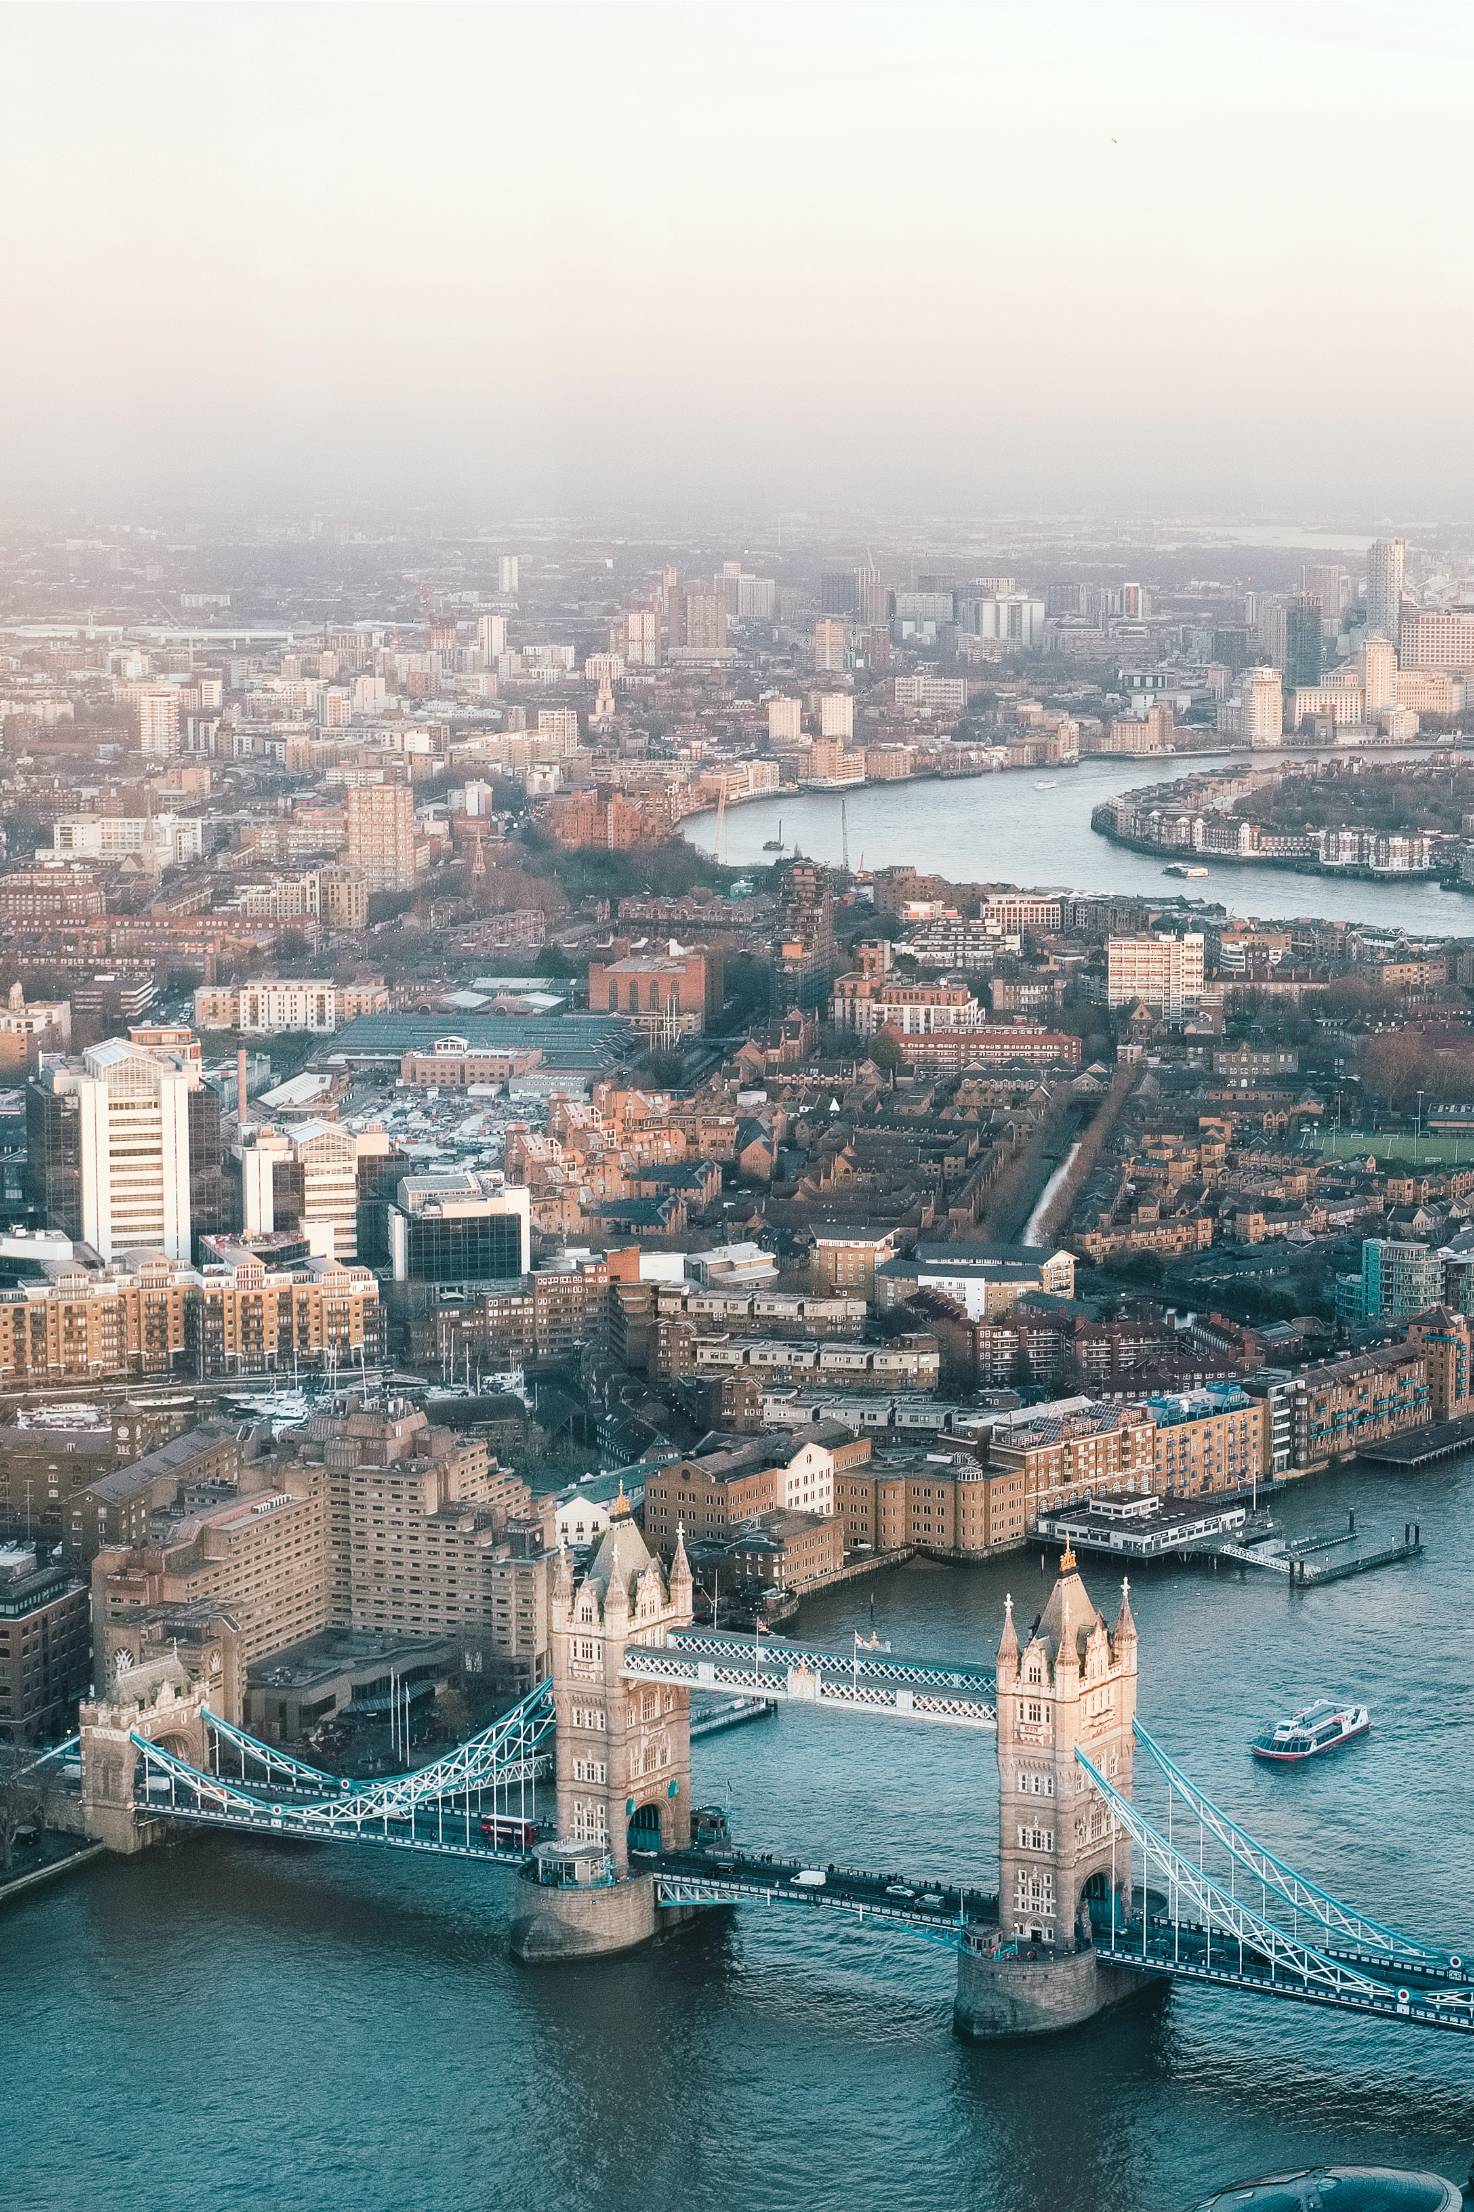 10 Things You Need to Do During a Trip to the UK